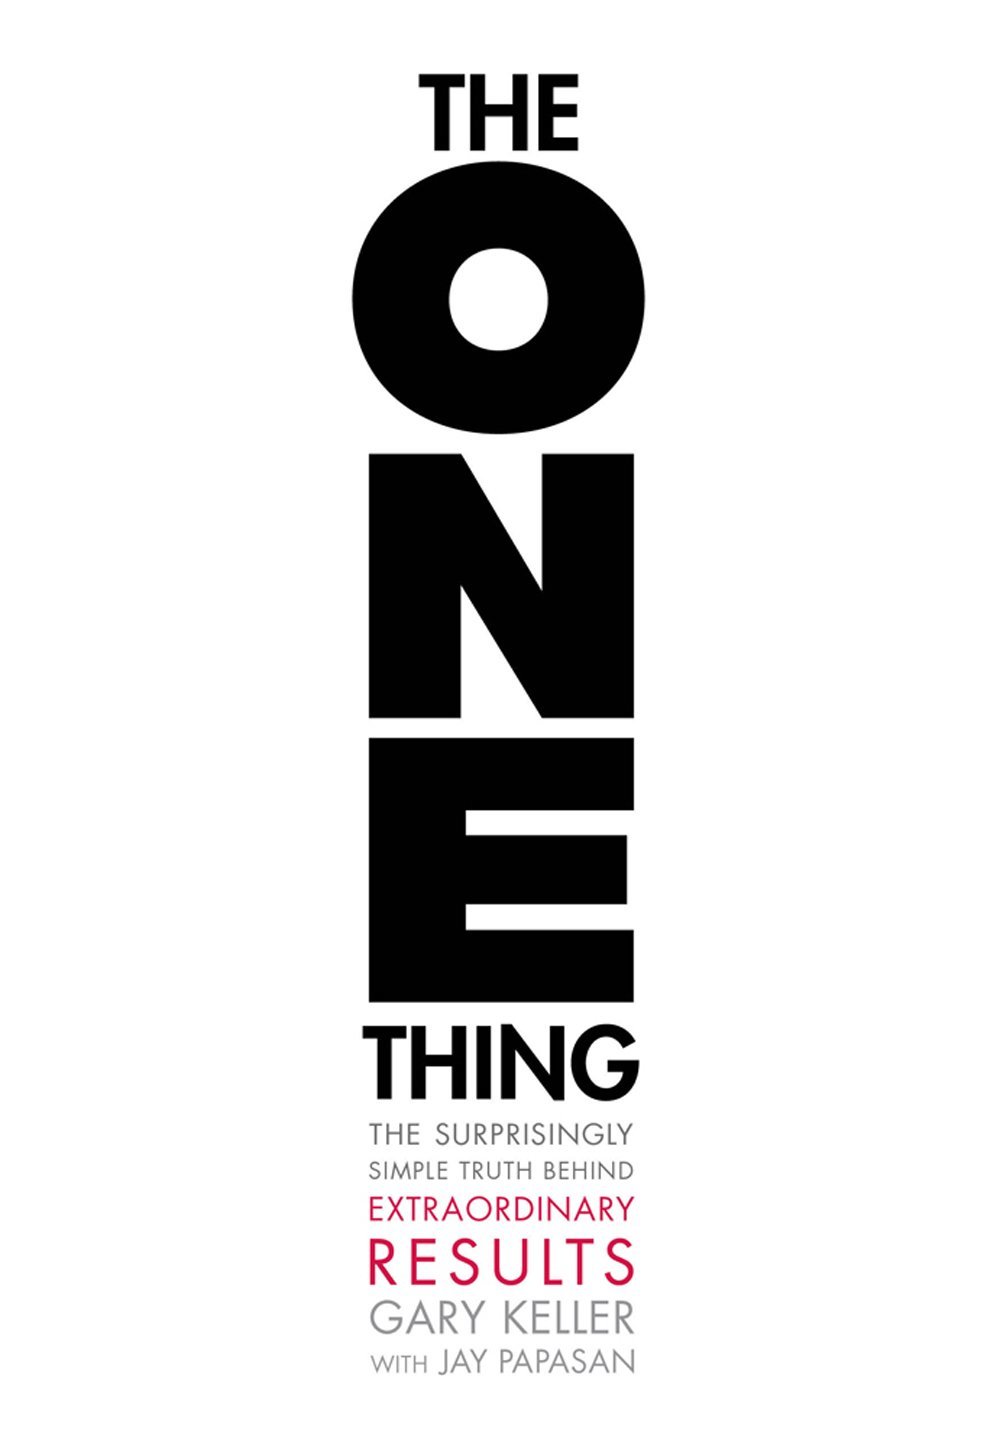 One thing at a time - simple truth of success by Gary Keller